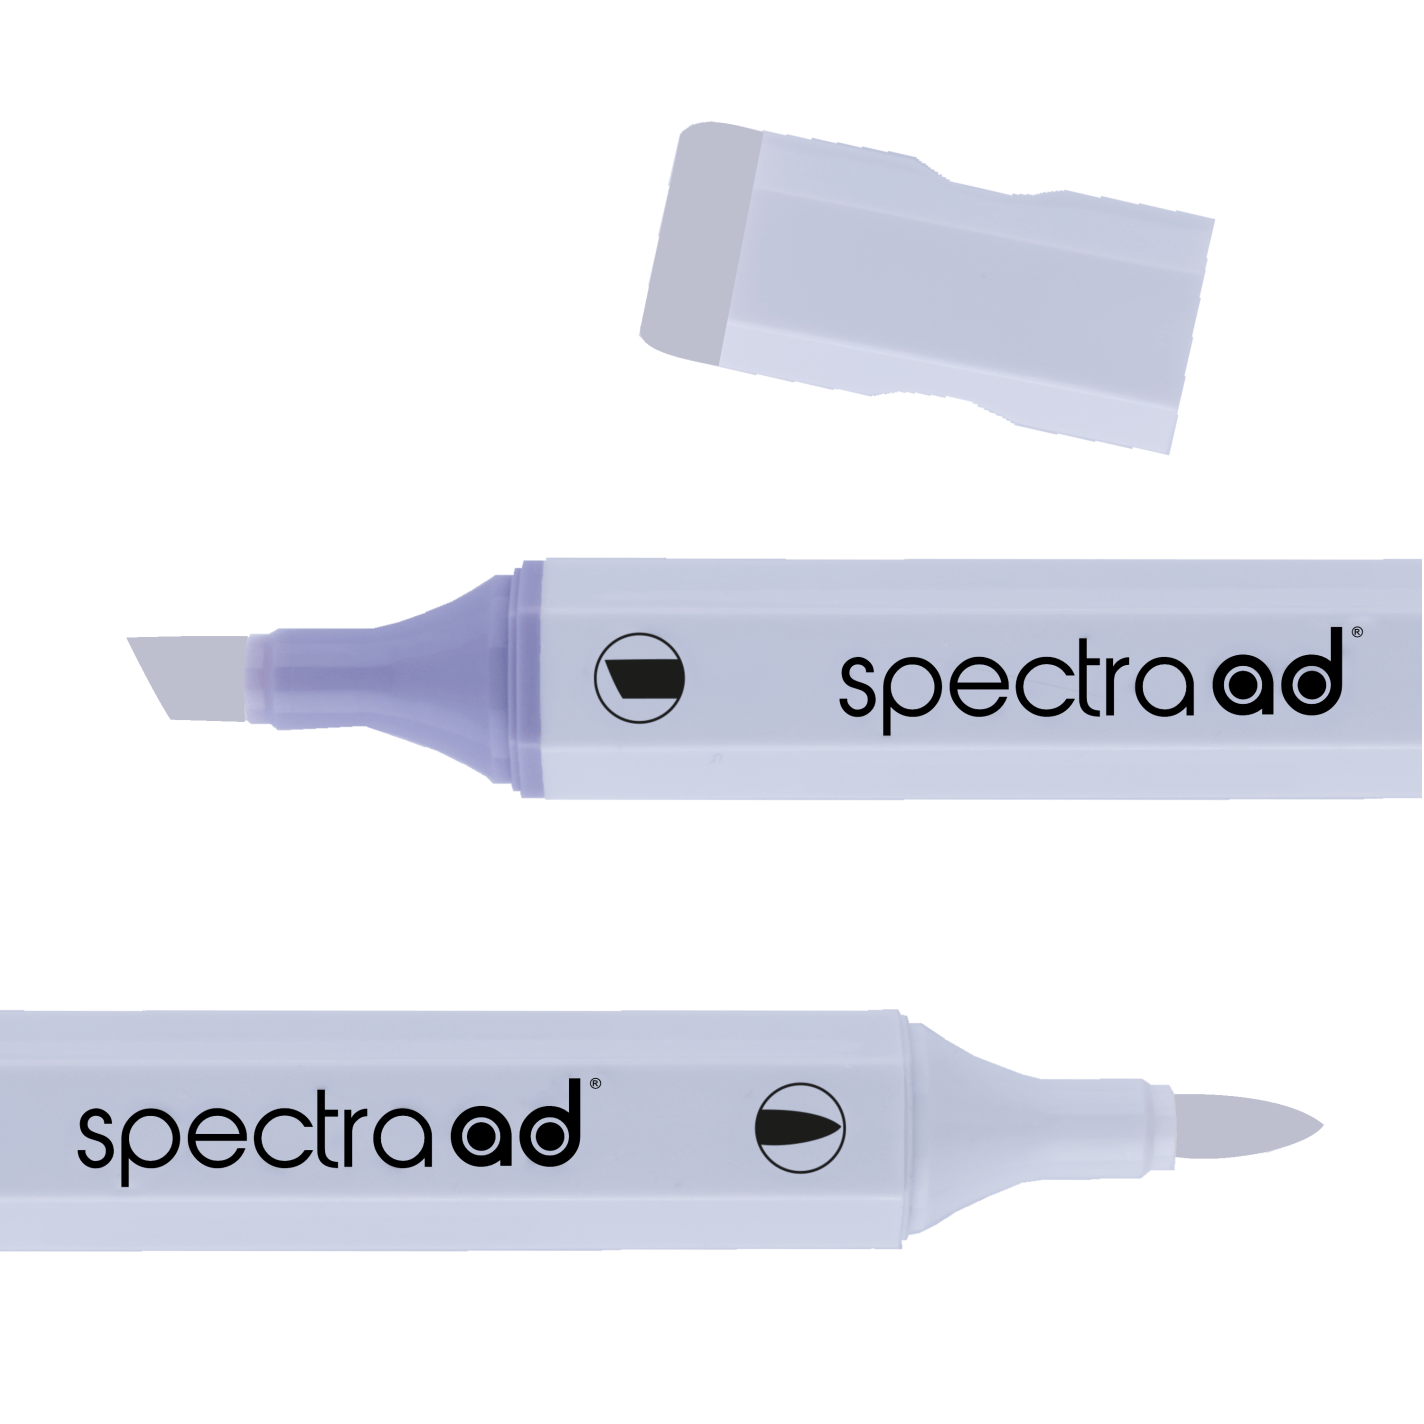 AD Marker Spectra Cool Gray 70